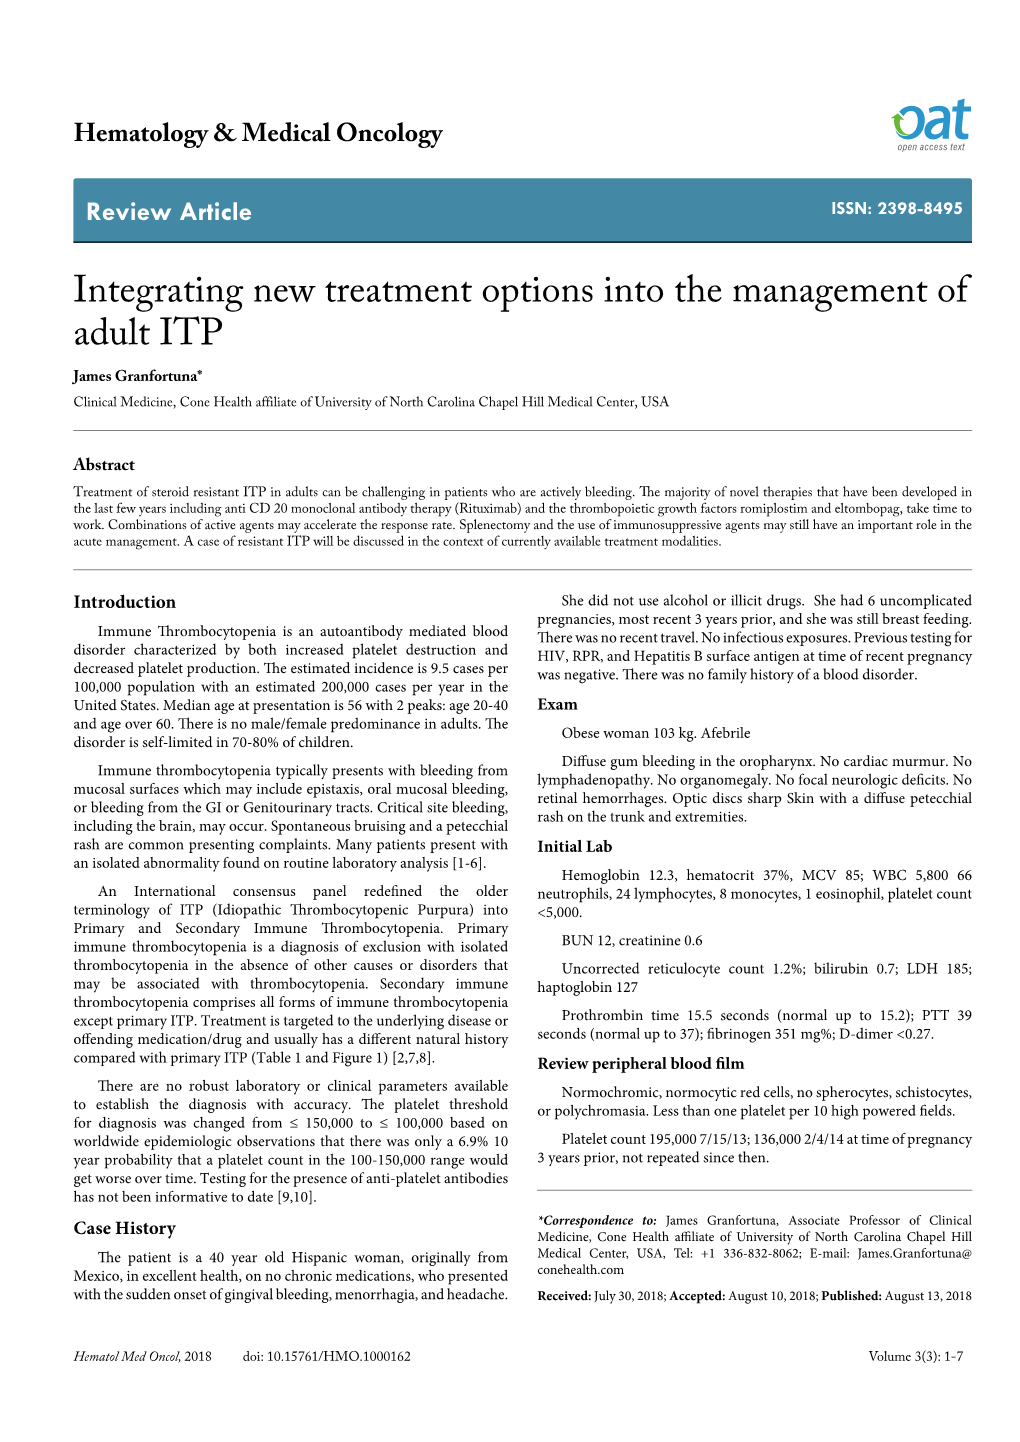 Integrating New Treatment Options Into the Management of Adult